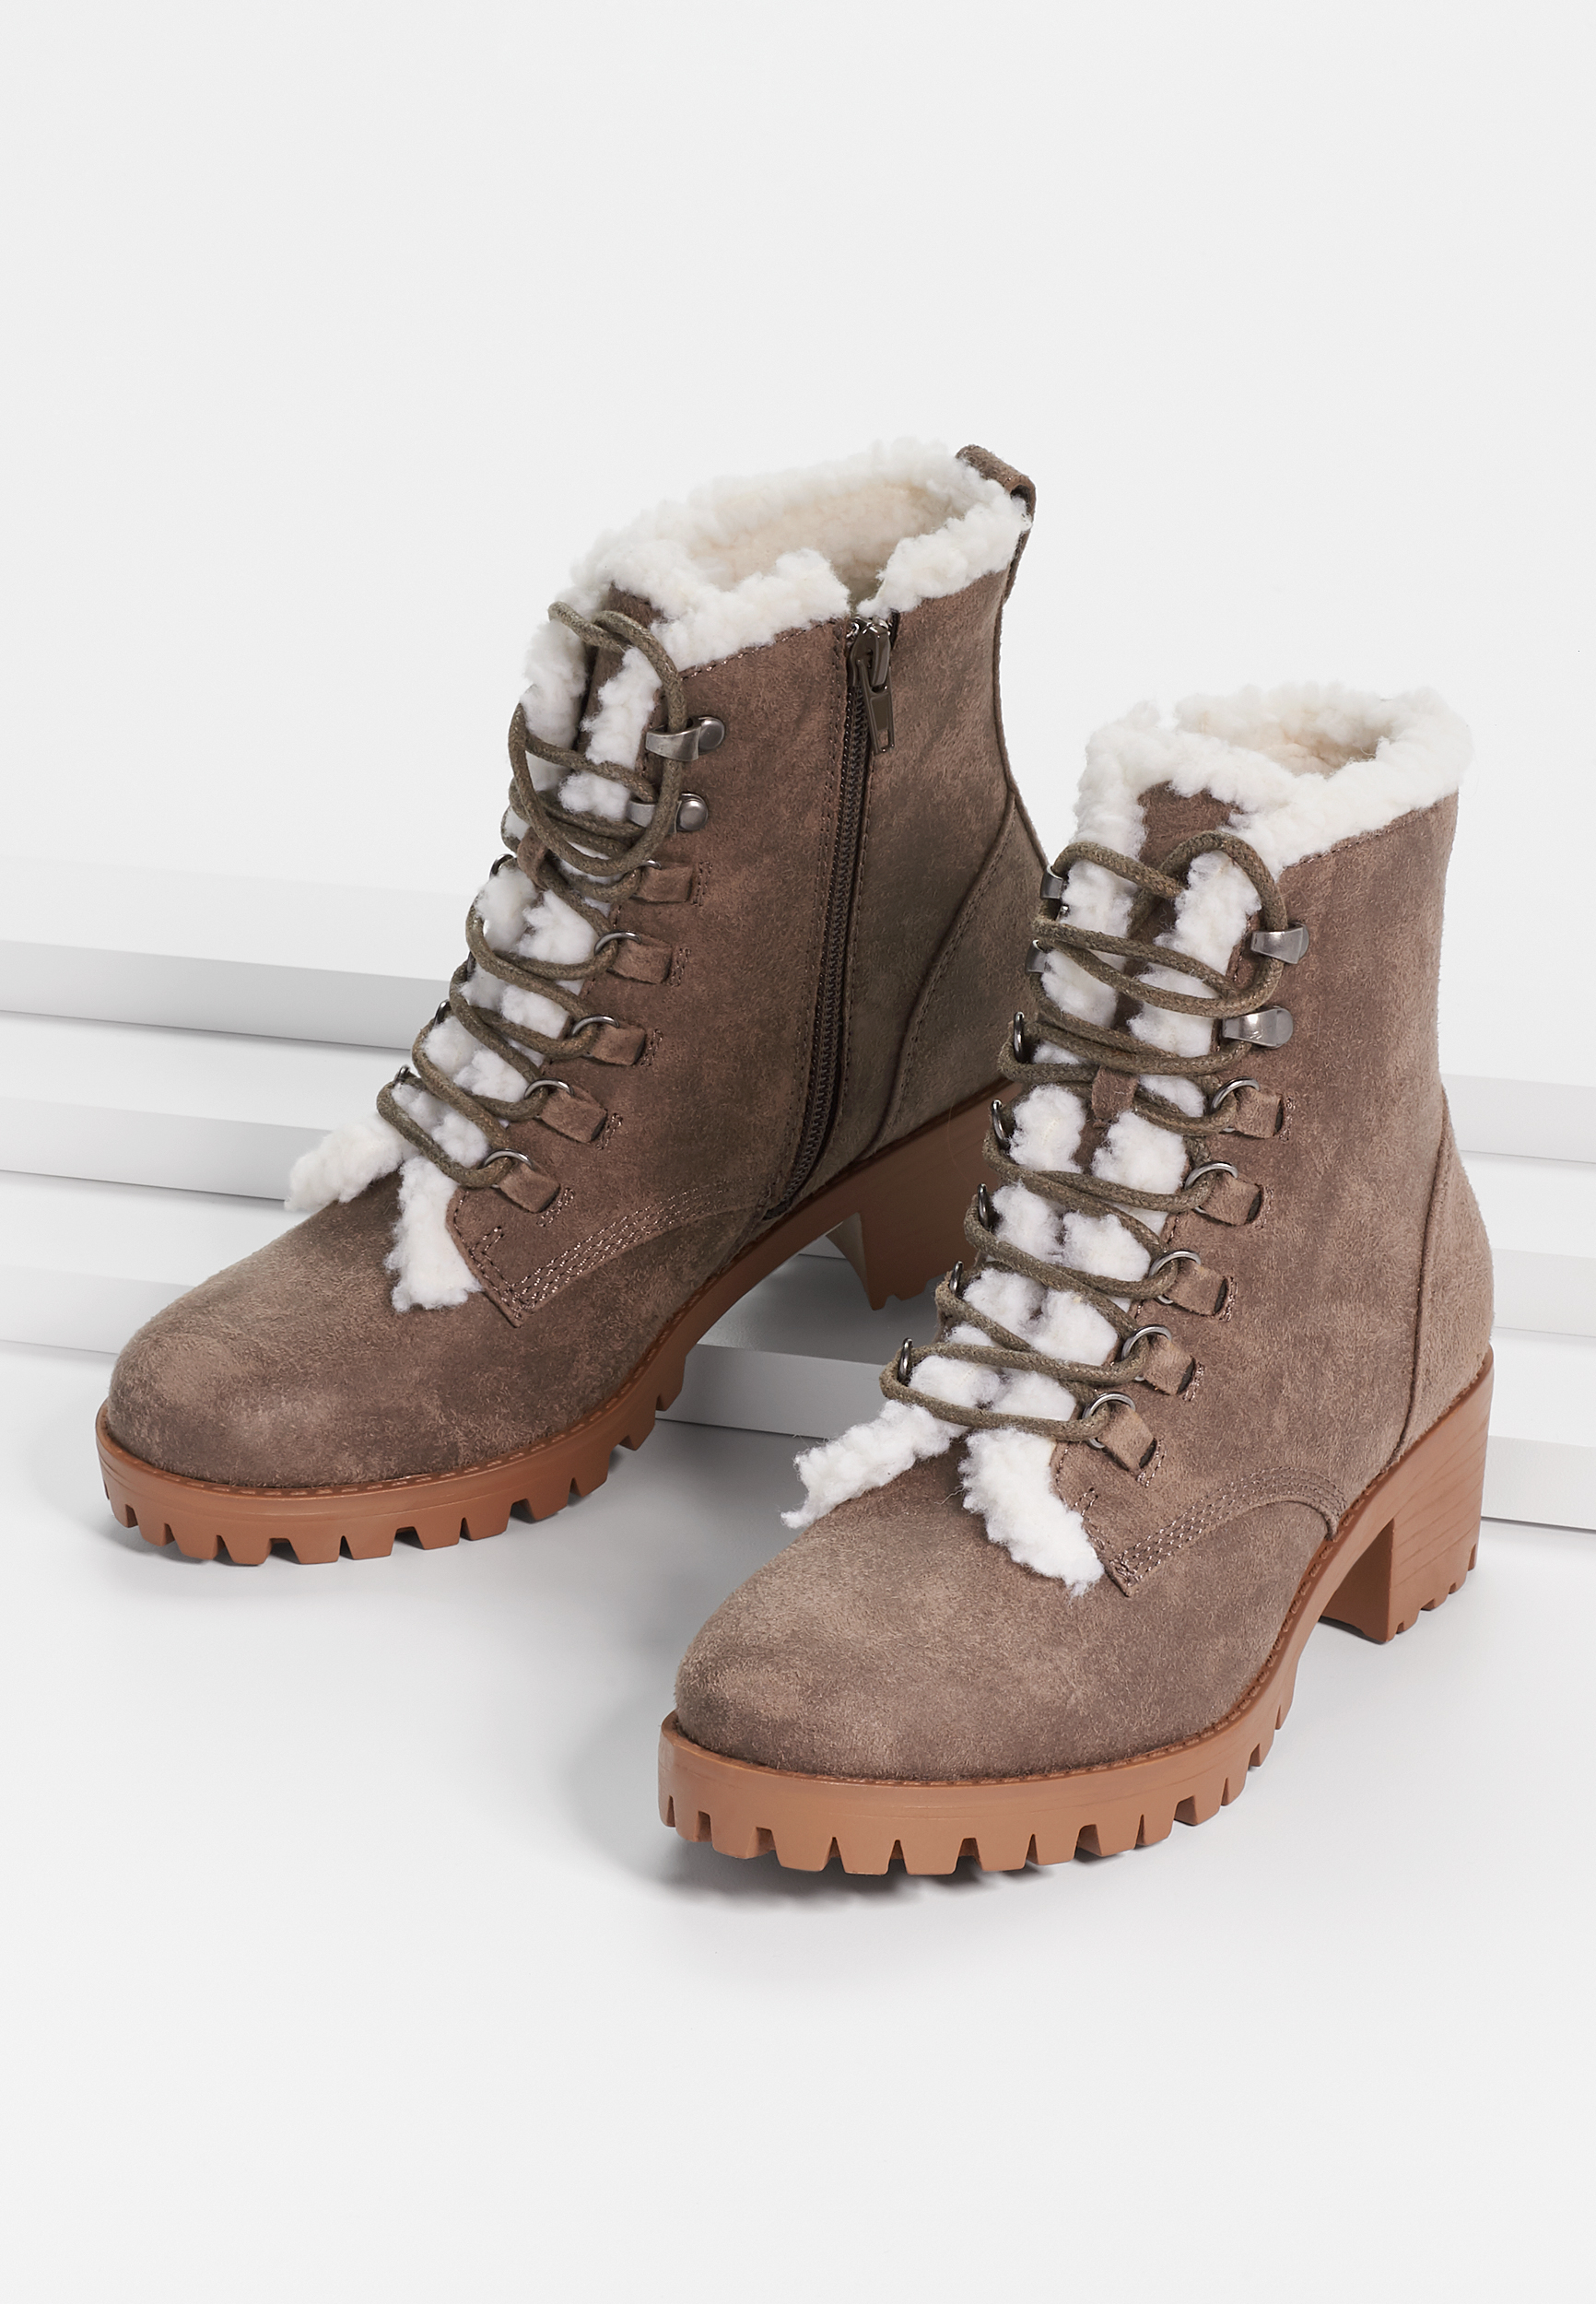 sherpa lined boots